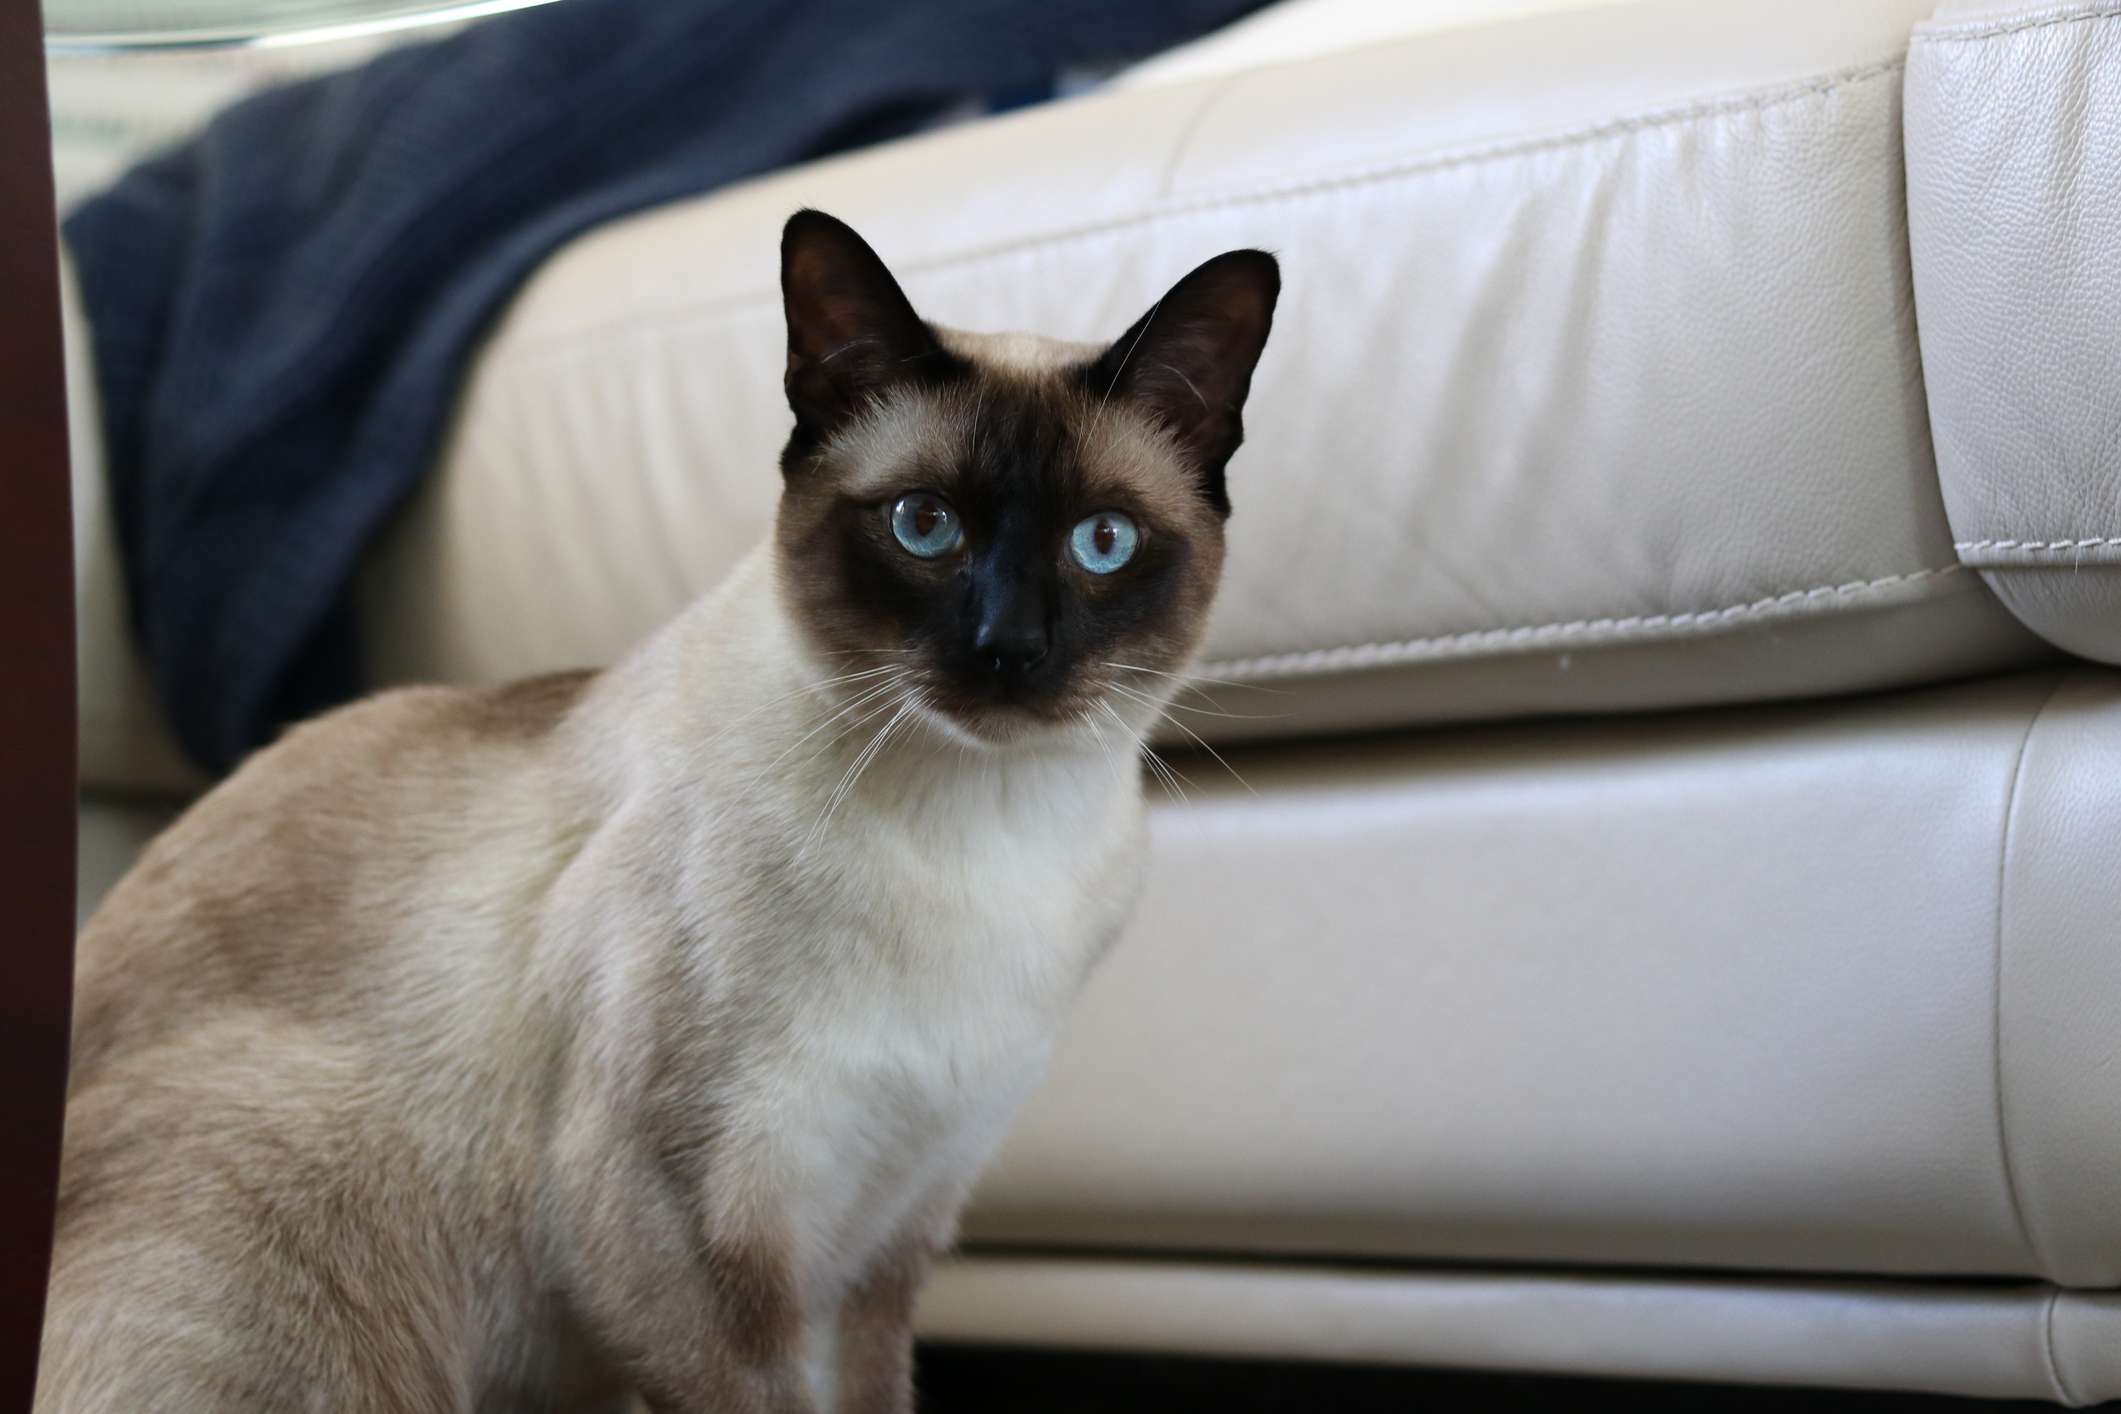 A cat with perked ears, blue eyes, and a dark face sitting in front of a couch.